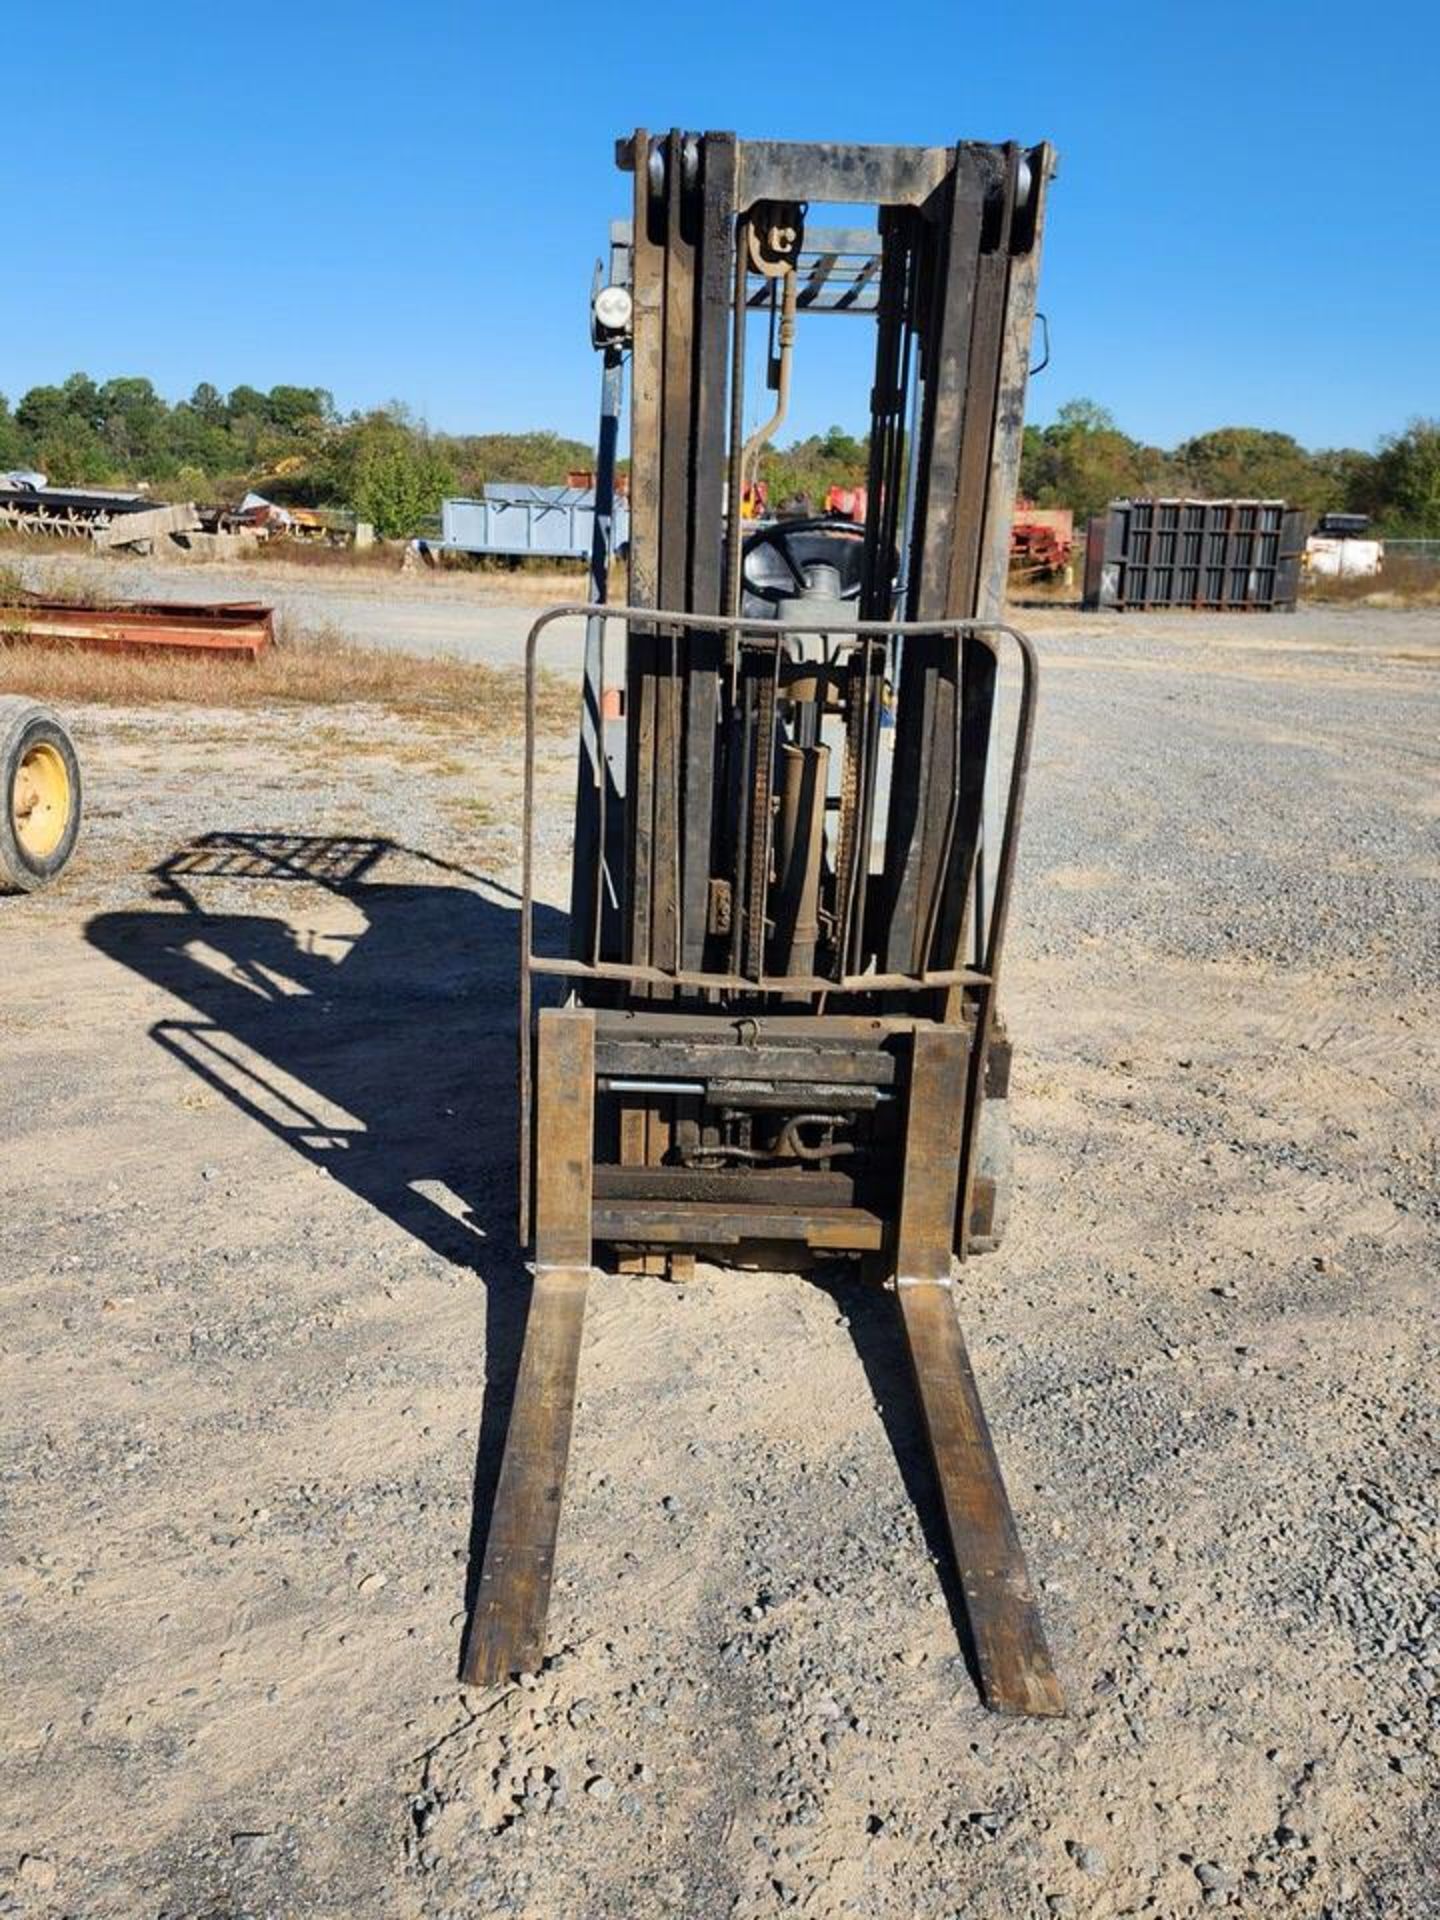 Toyota 30-5FBC15 Ele Forklift 3-Stage Mast; 185" Max Lift ht.; Hrs: 32,982.1; W/ Charger - Image 2 of 17